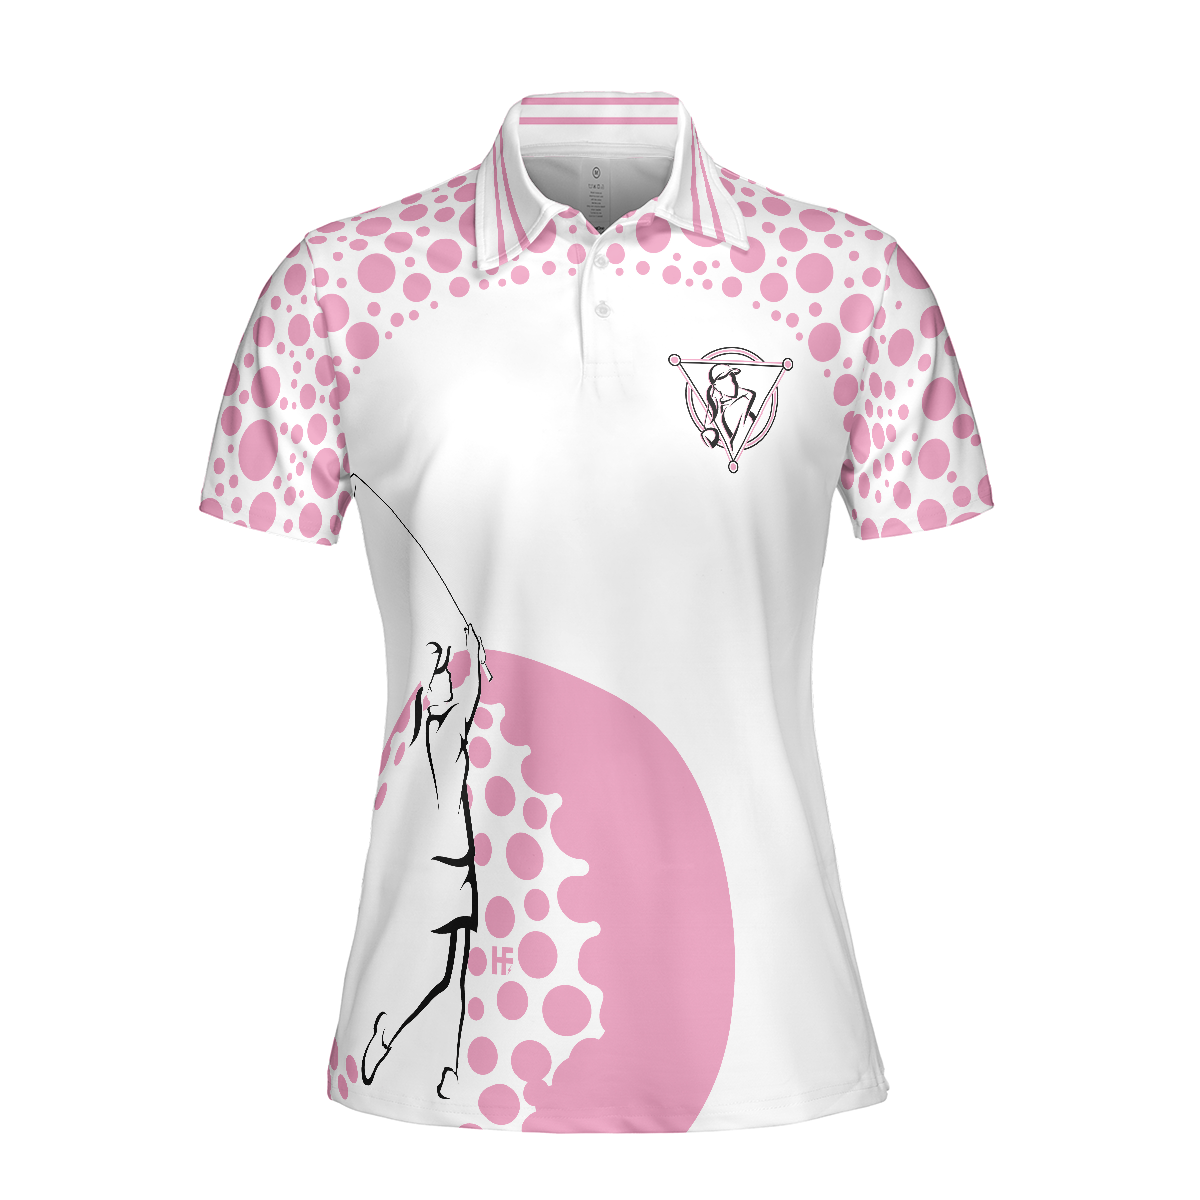 Real Grandmas Play Golf Short Sleeve Women Polo Shirt White And Pink Golf Shirt For Ladies Funny Female Golf Gift - 3